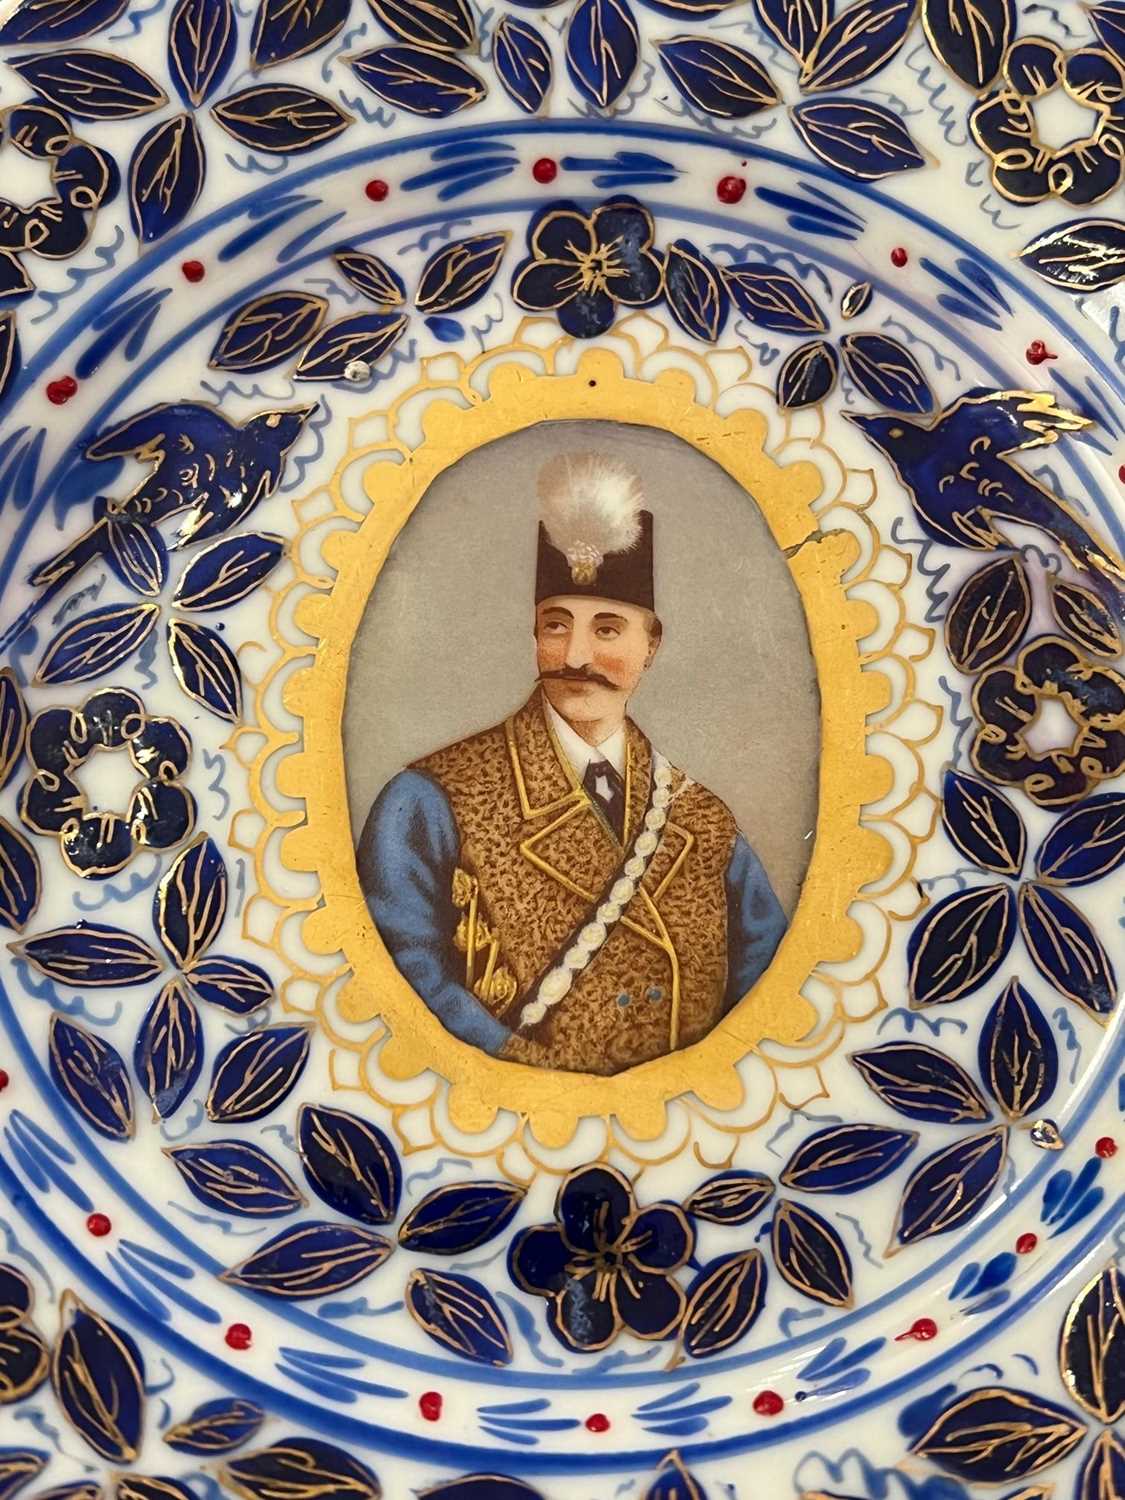 A PORCELAIN PART TEA SET MADE FOR THE PERSIAN MARKET - Image 5 of 5